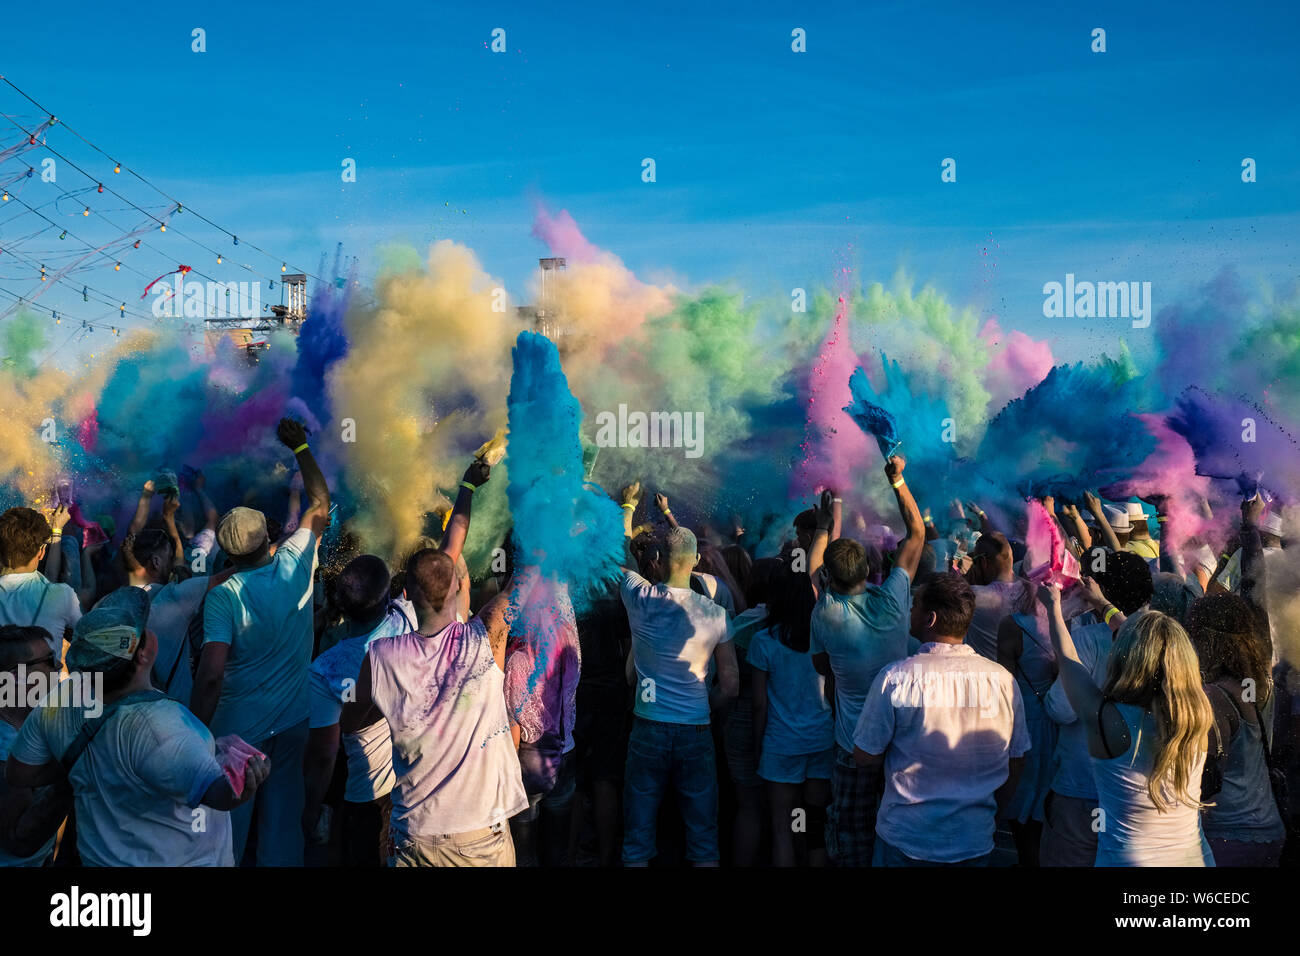 https://c8.alamy.com/comp/W6CEDC/hundreds-of-young-people-are-celebrating-holi-the-festival-of-colors-throwing-color-powder-in-the-air-W6CEDC.jpg